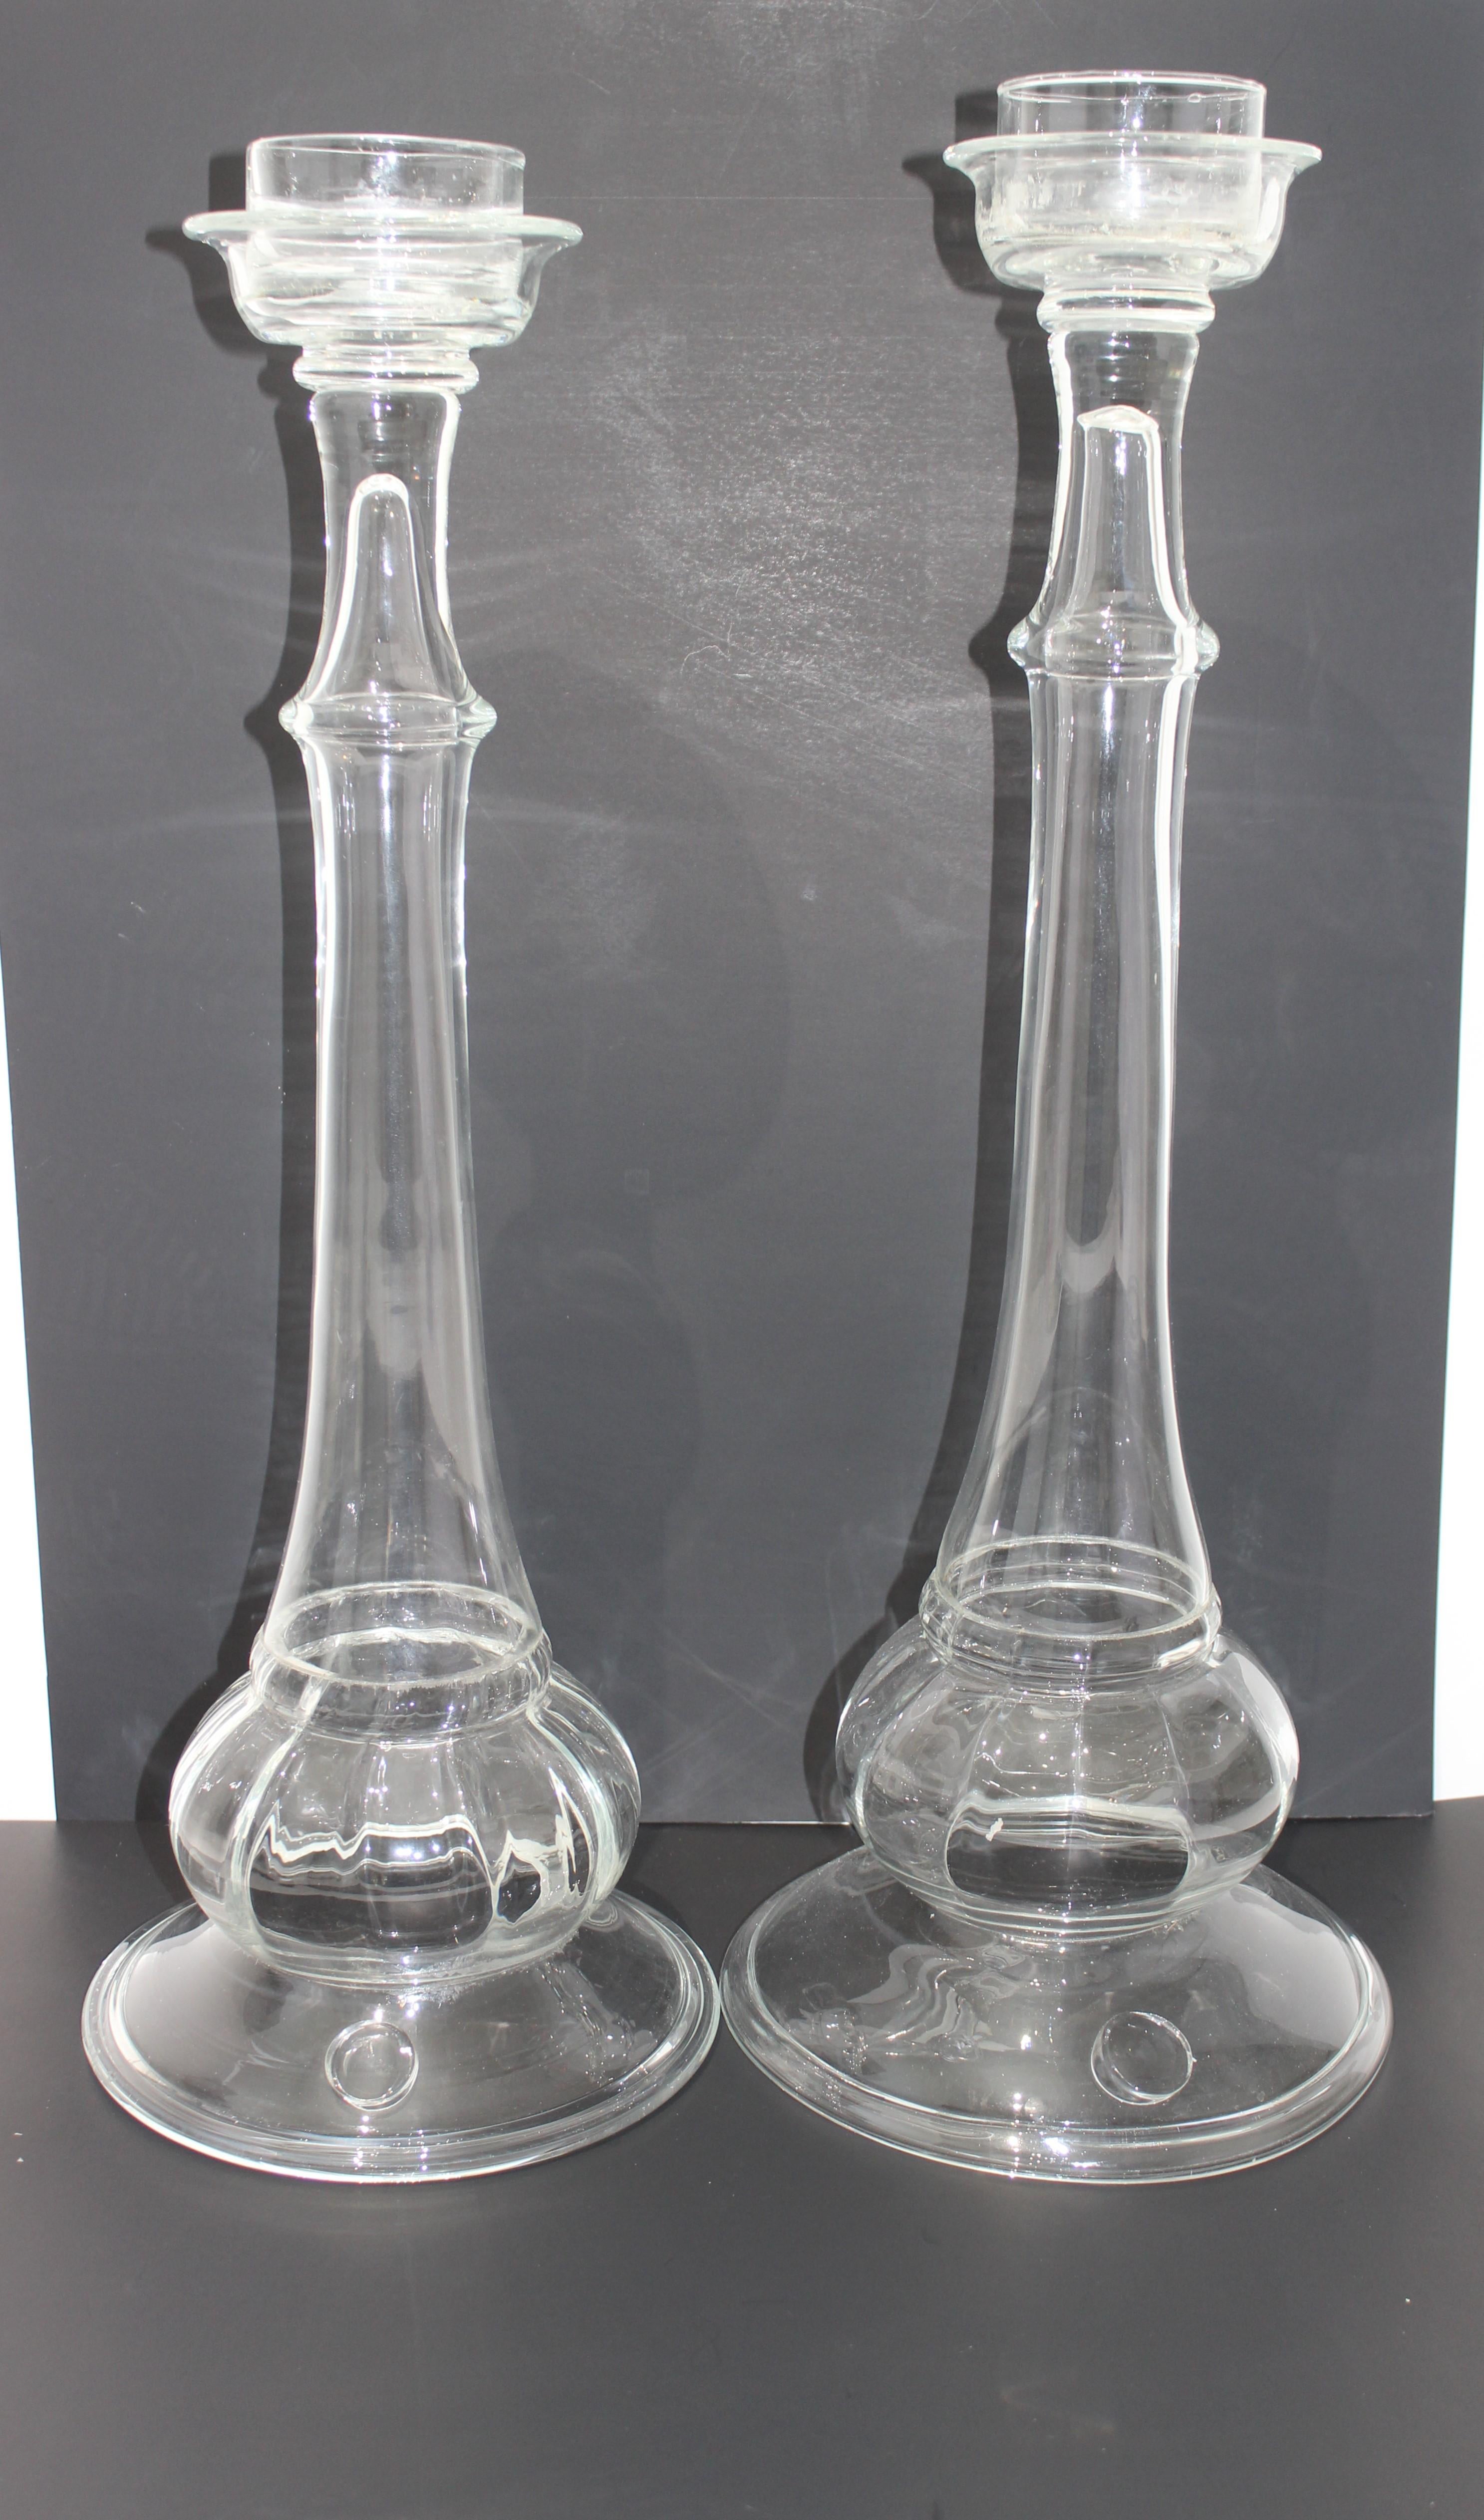 This stylish set of two hand blown glass candlesticks date to the 1970s-1980s and were created by Blenko glass.

Note: Dimensions are 26